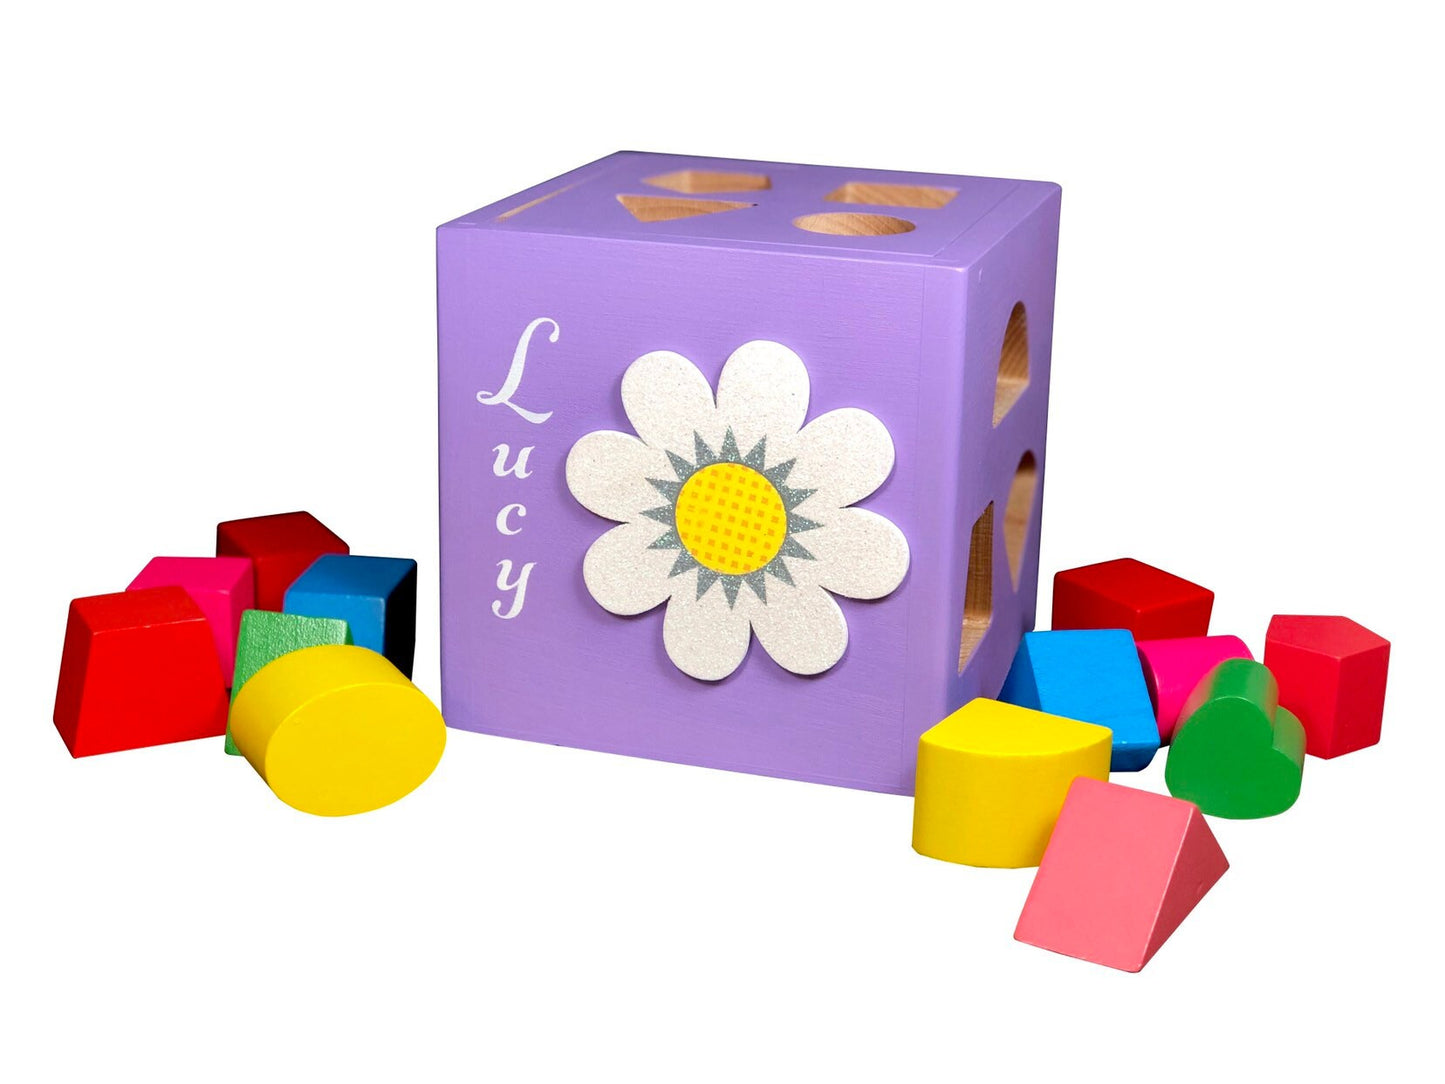 Pink baby toys / personalized shape box with blocks